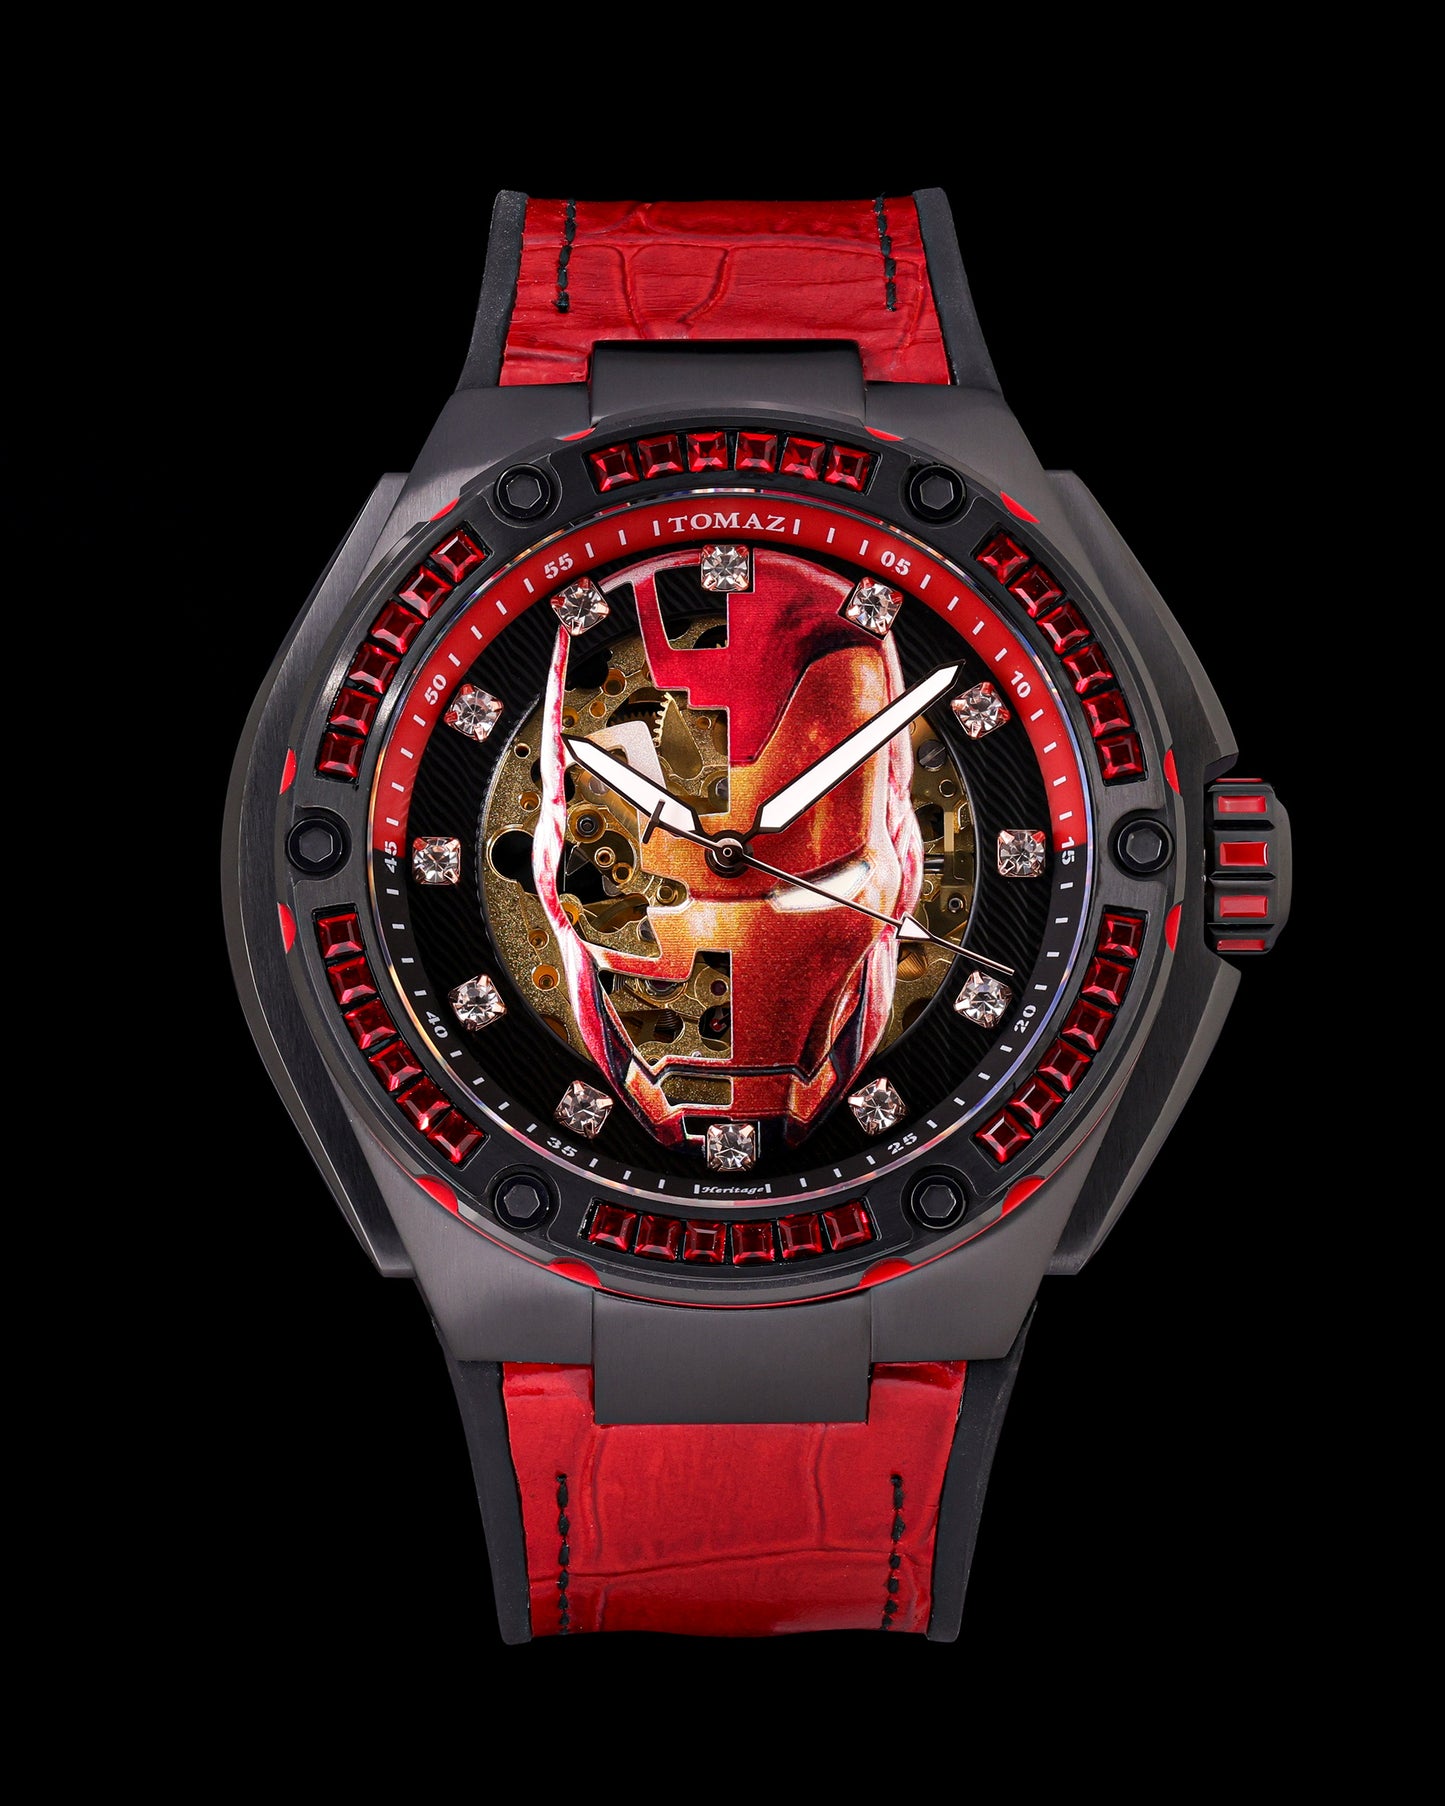 Marvel Iron Man TW037A-D3 (Black/Red) with Red Swarovski Crystal (Red Silicone with Leather Bamboo Strap)